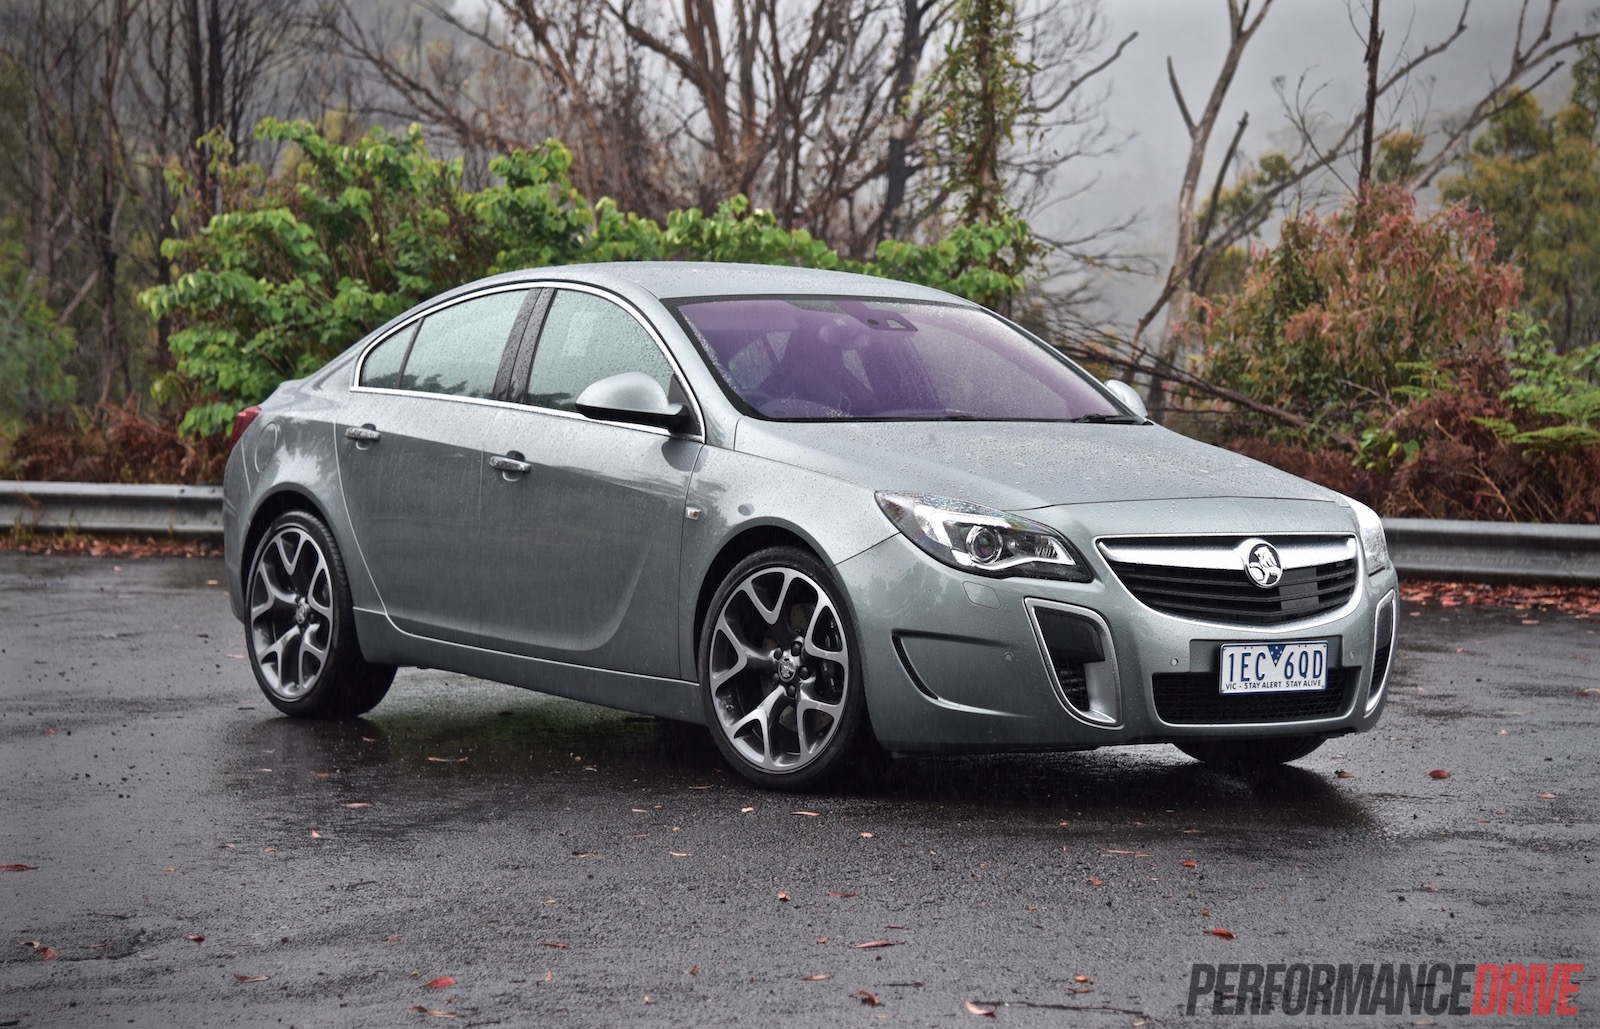 2015 Holden Insignia VXR review (video)